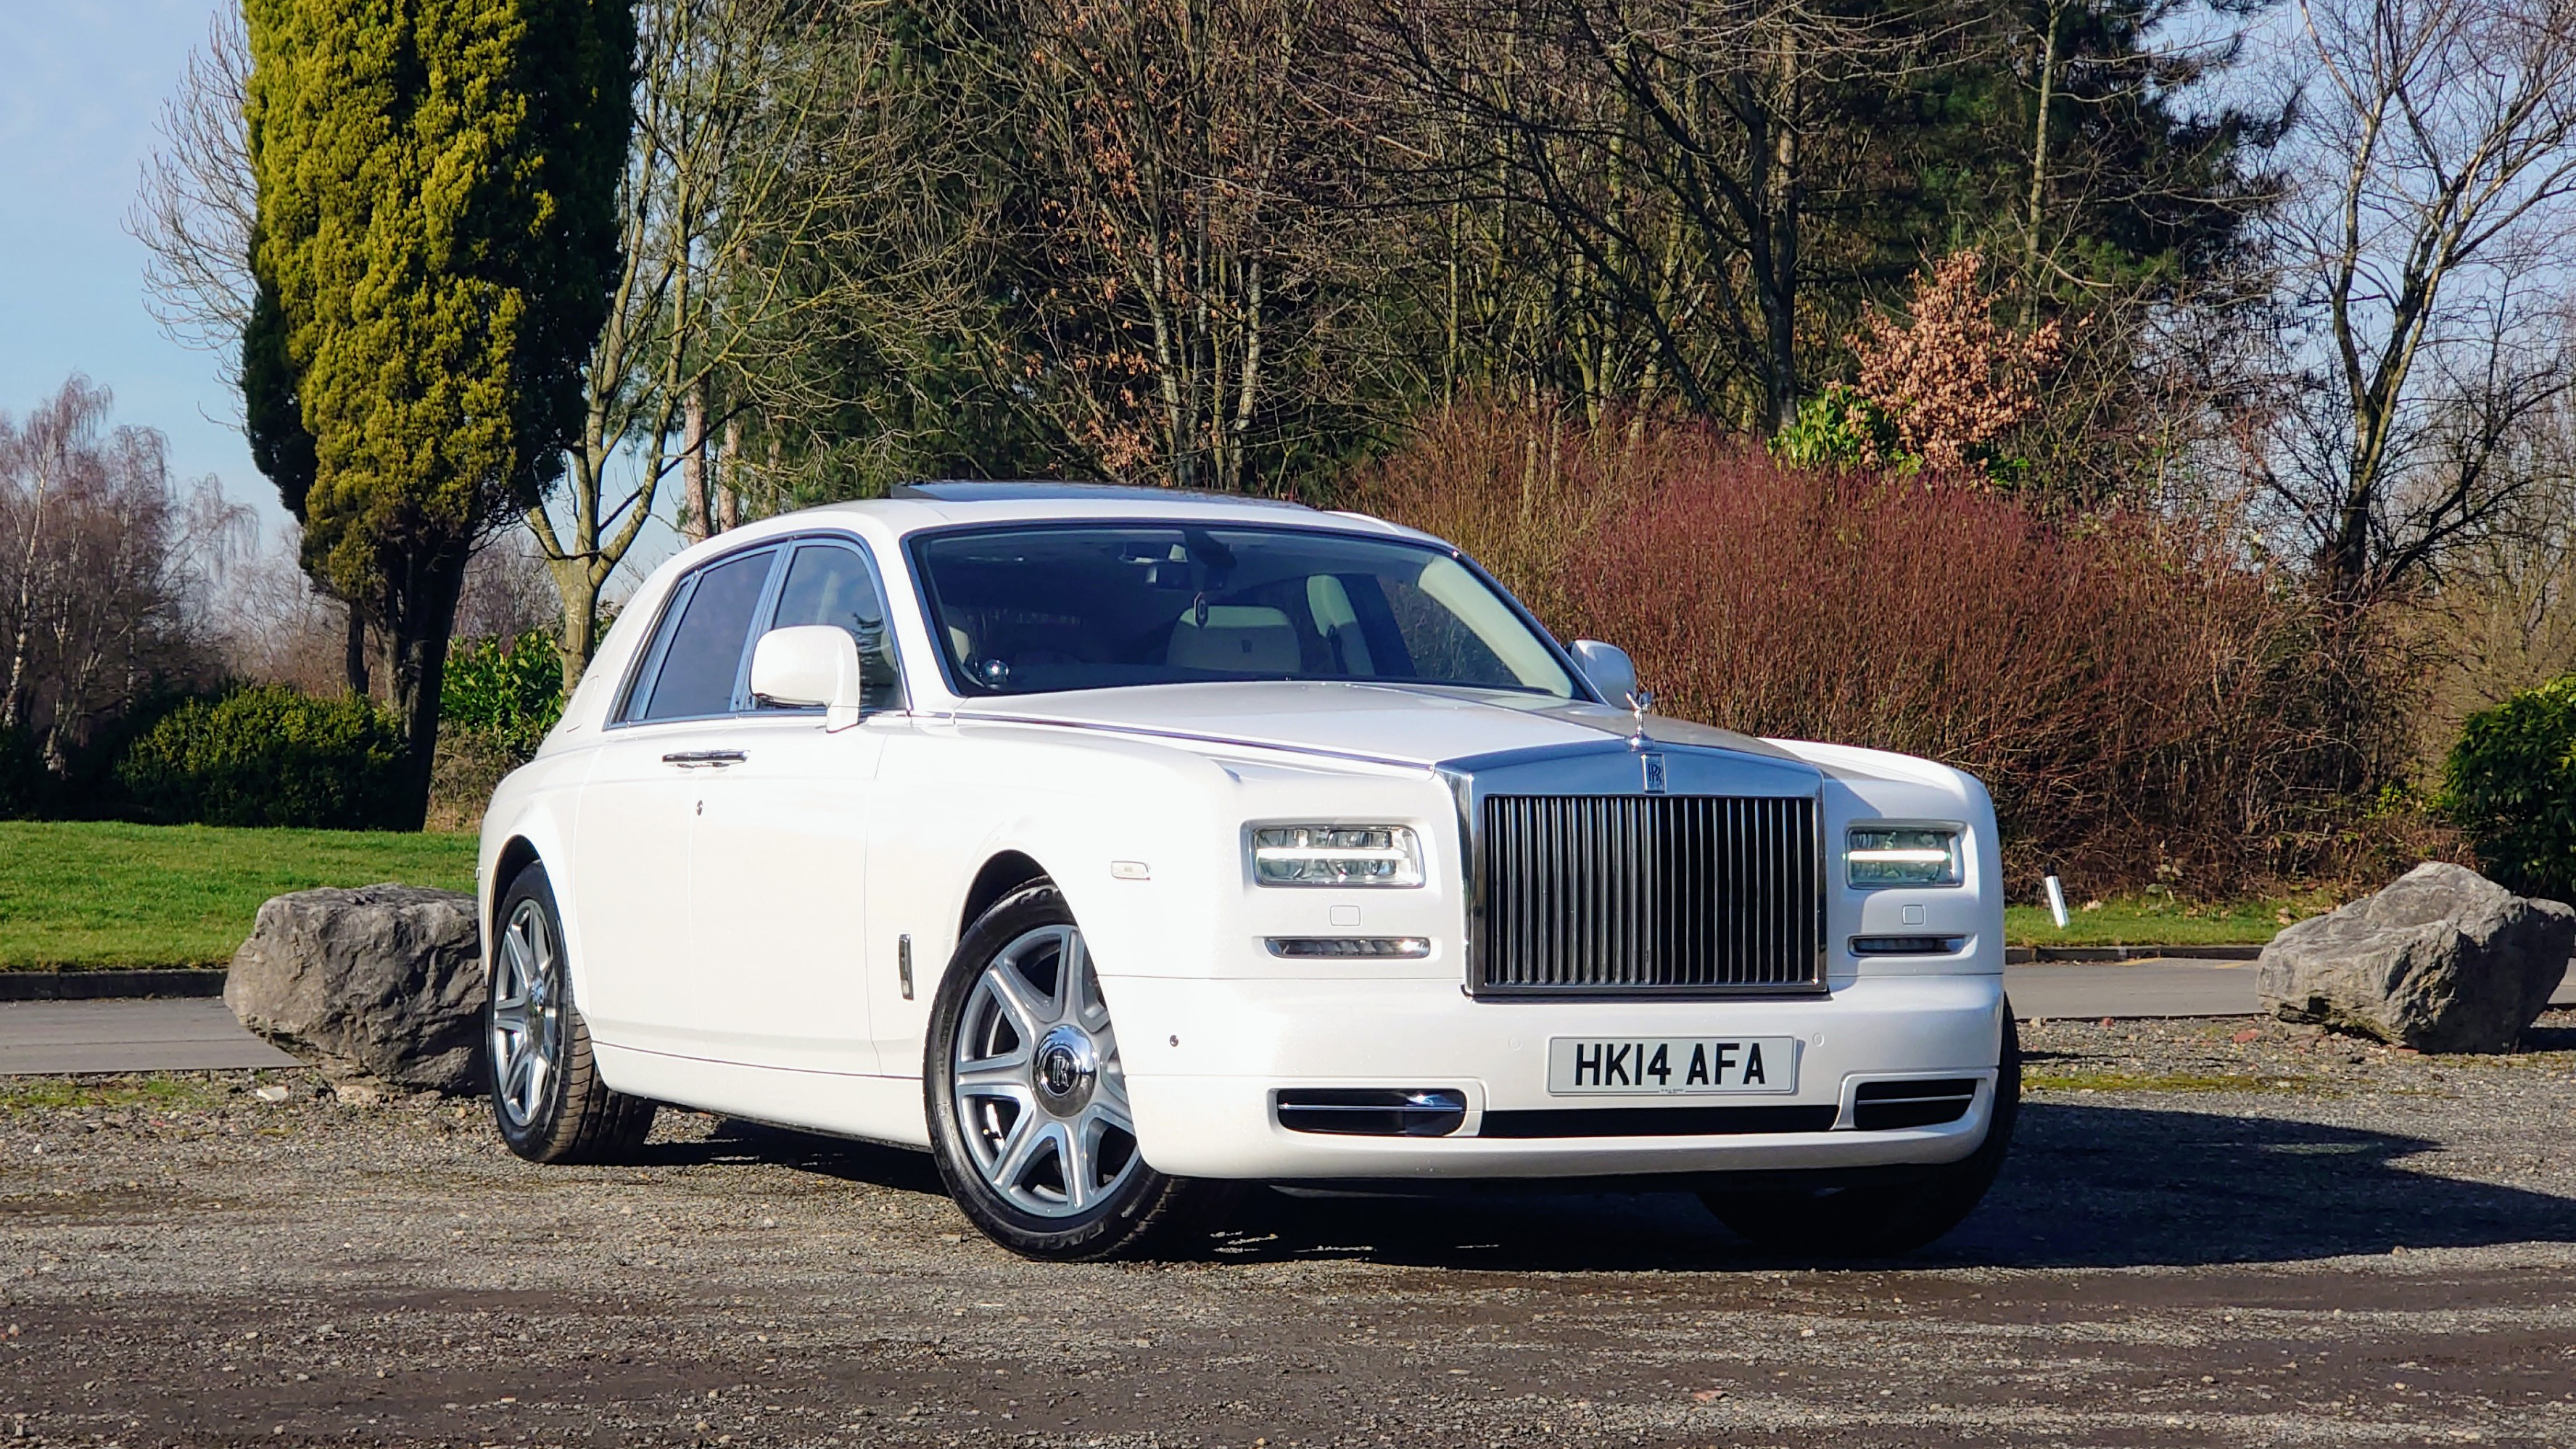 Modern White Rolls-Royce Phantom in front parked in a park with autumn colours.